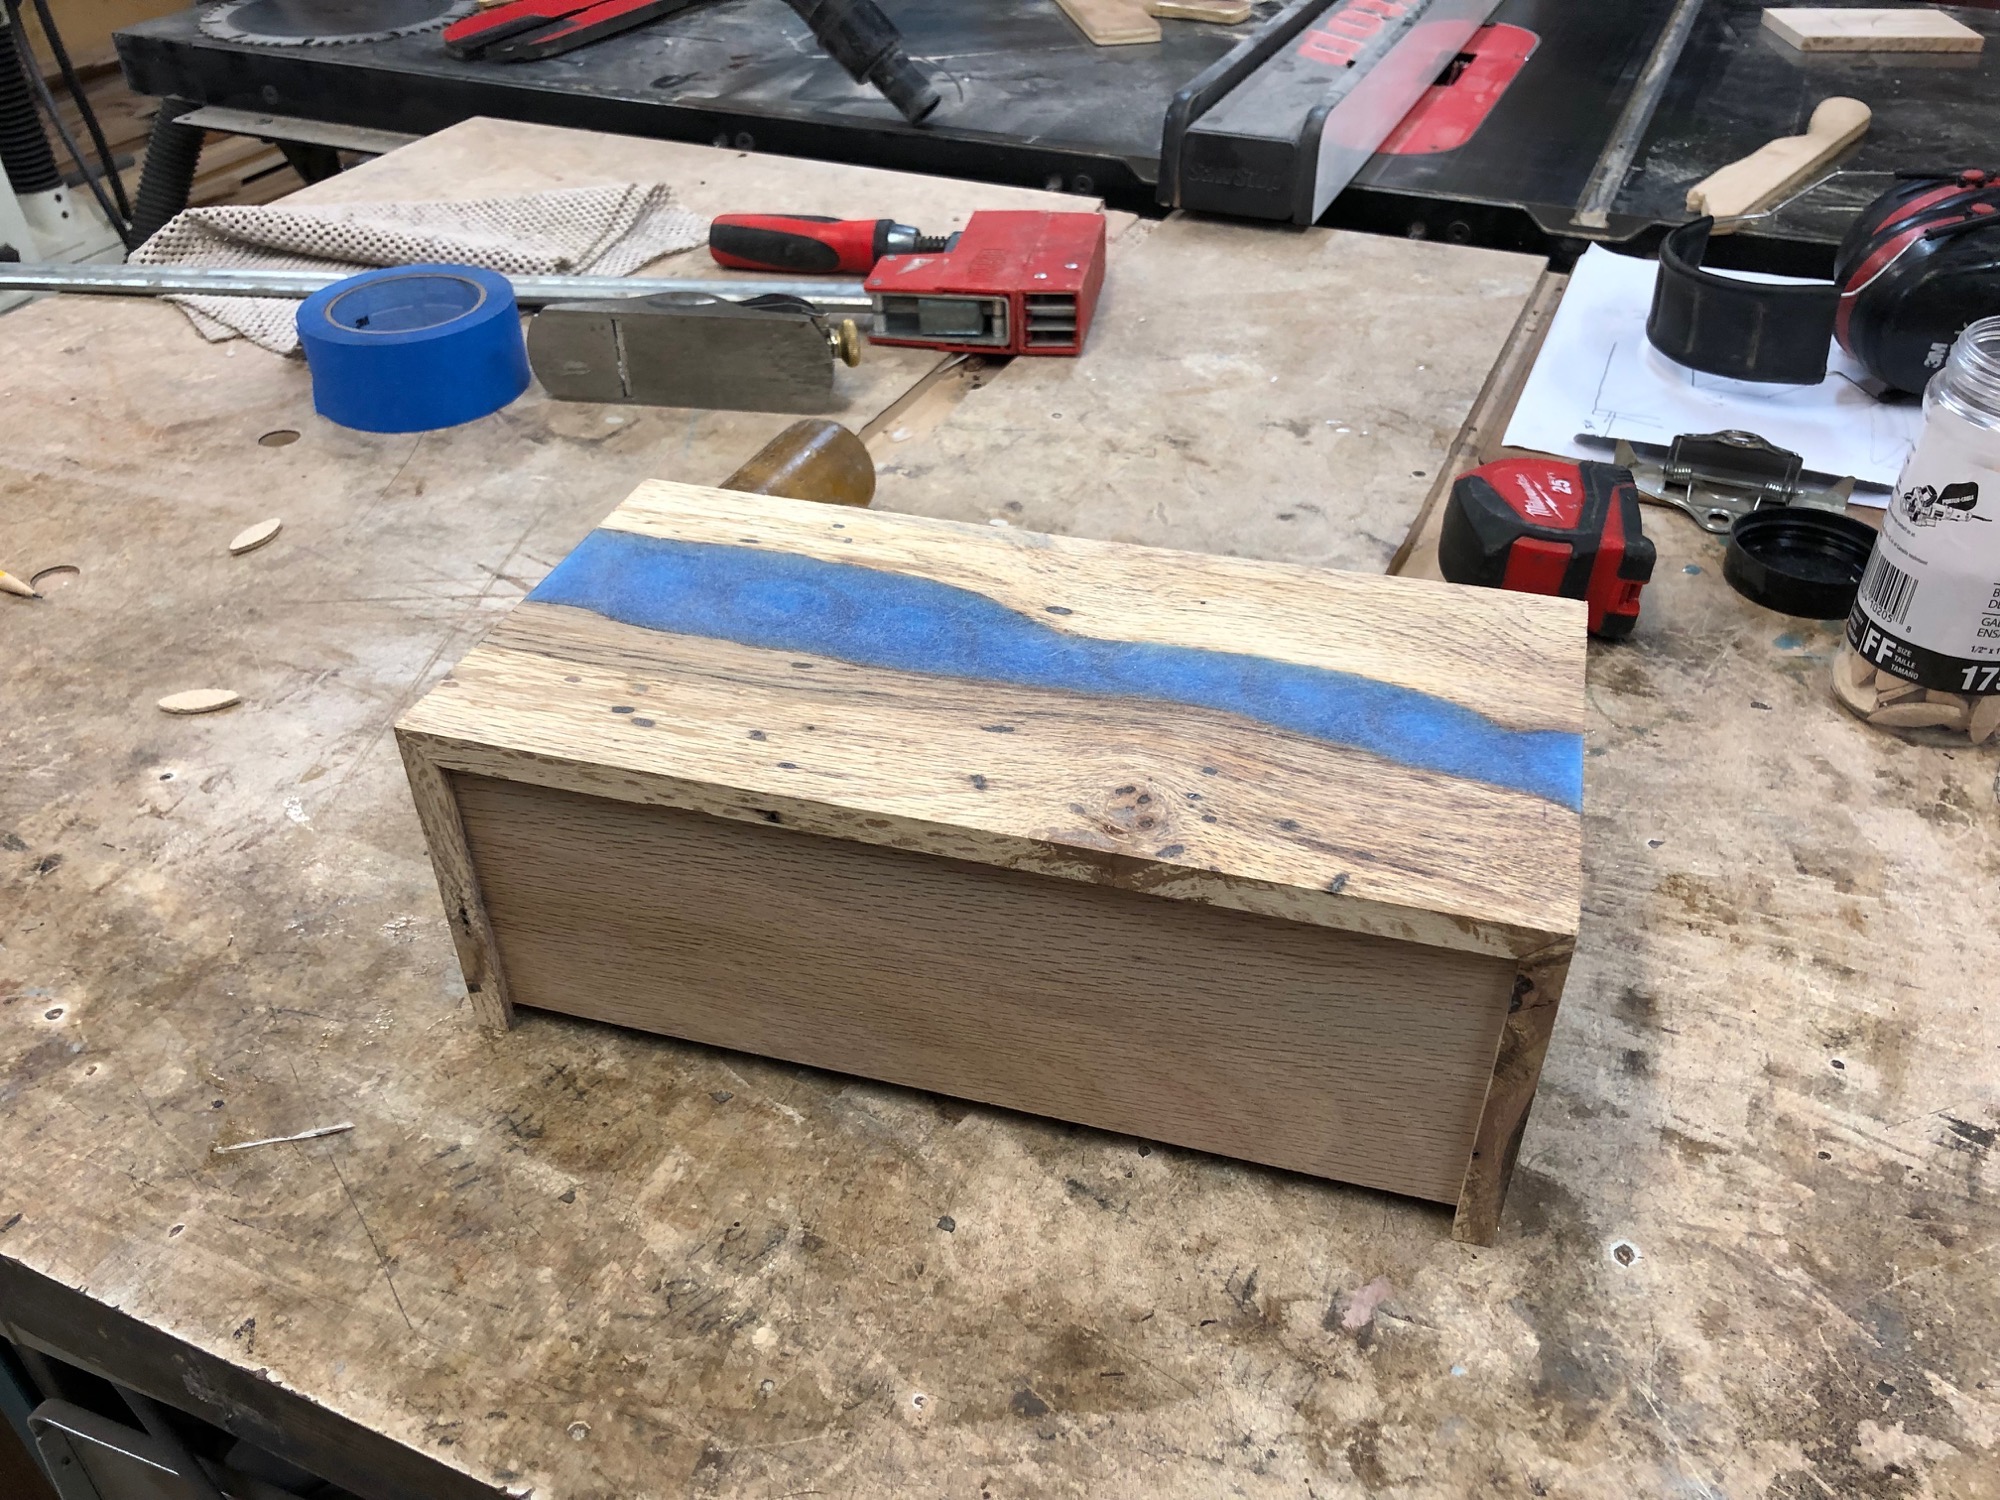 Test fitting the waterfall box